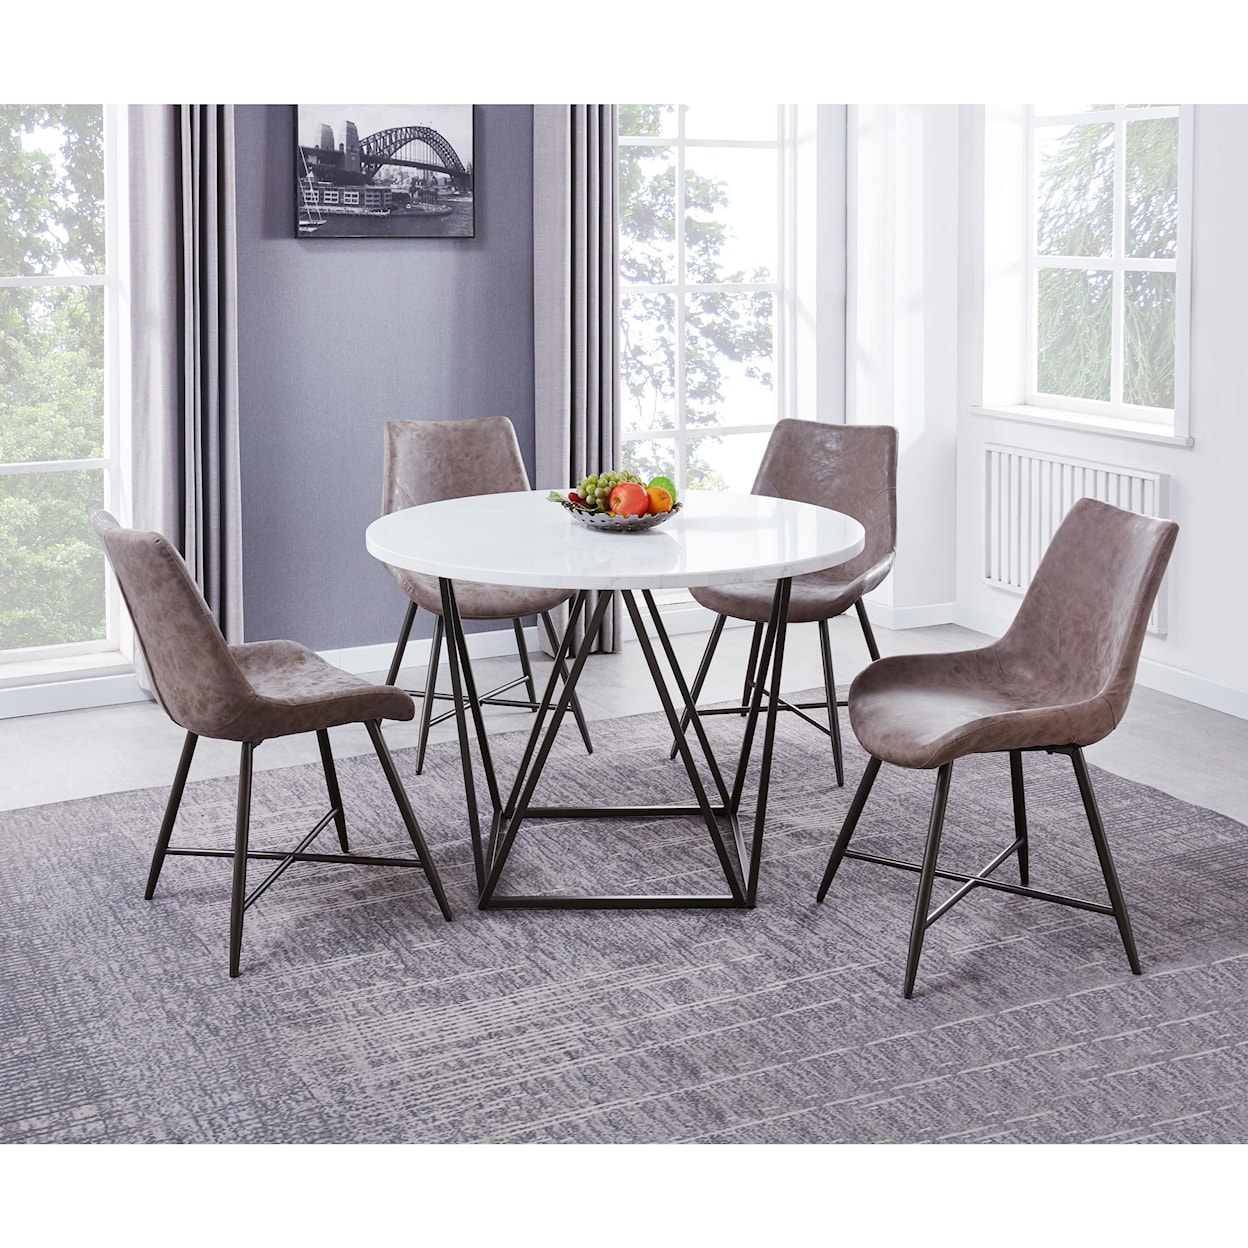 Prime Ramona White Marble Top Round Dining Table